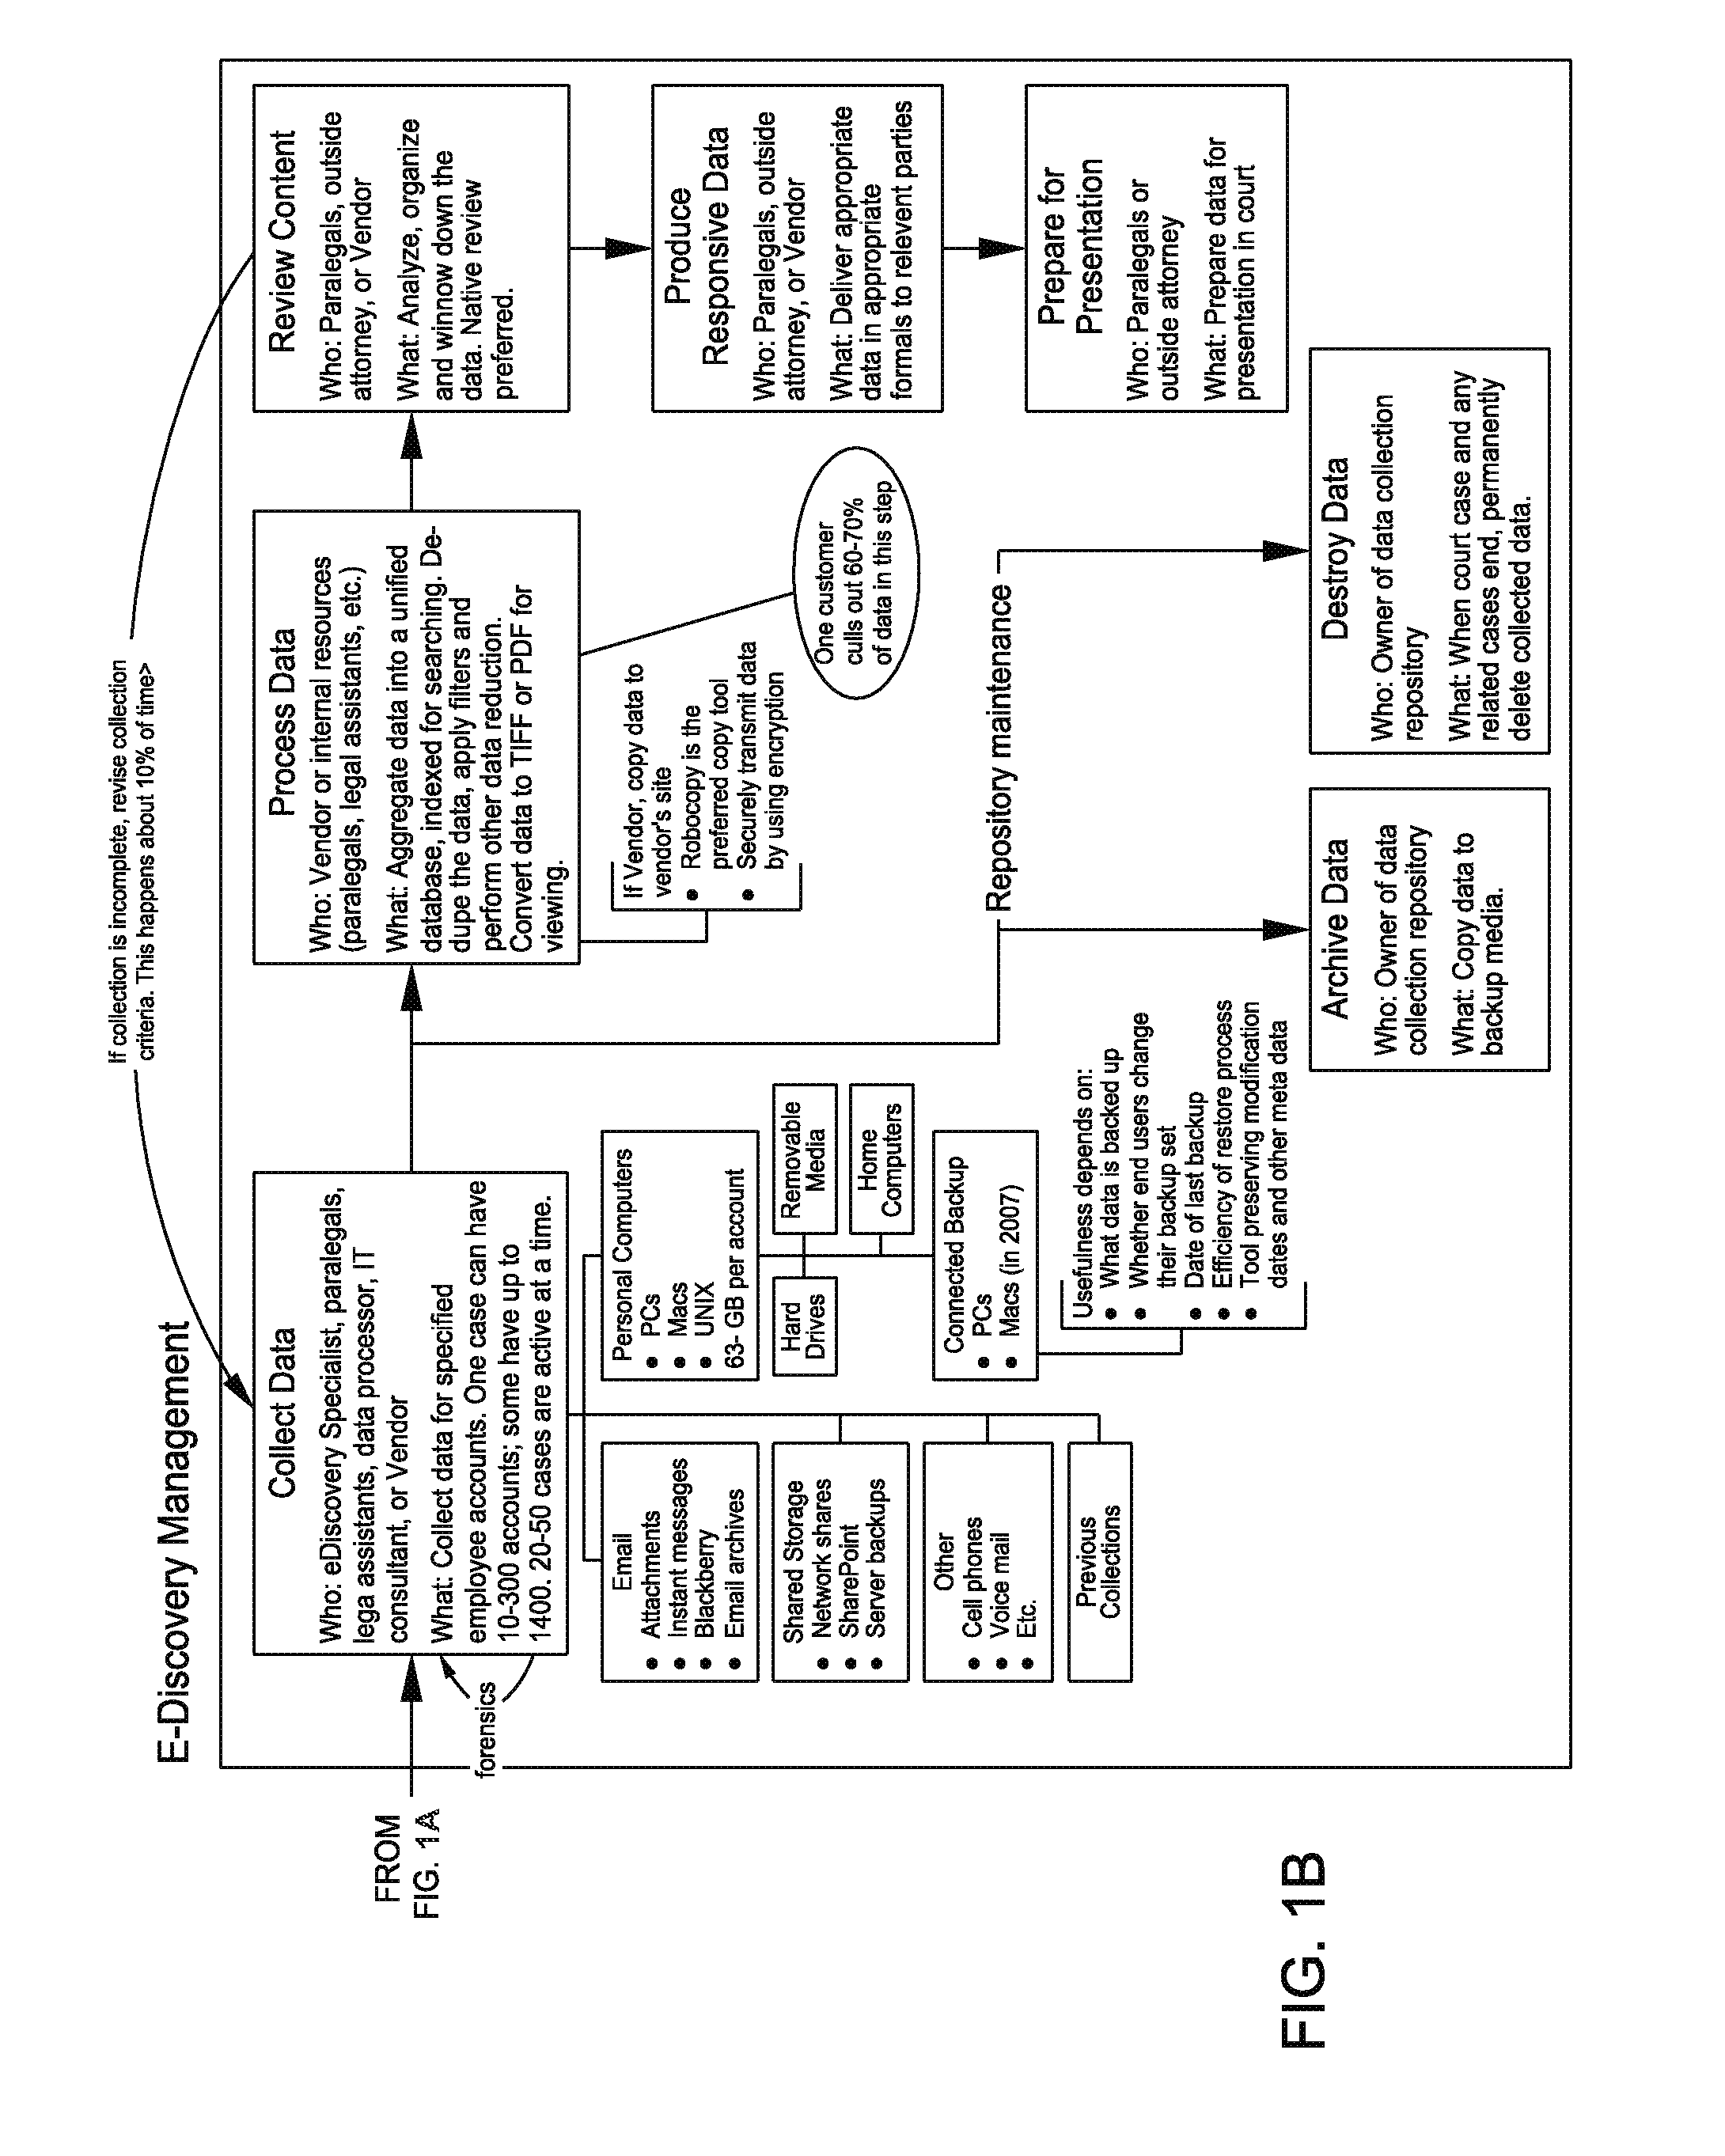 Computerized system and method for assisting in resolution of litigation discovery in conjunction with the federal rules of practice and procedure and other jurisdictions